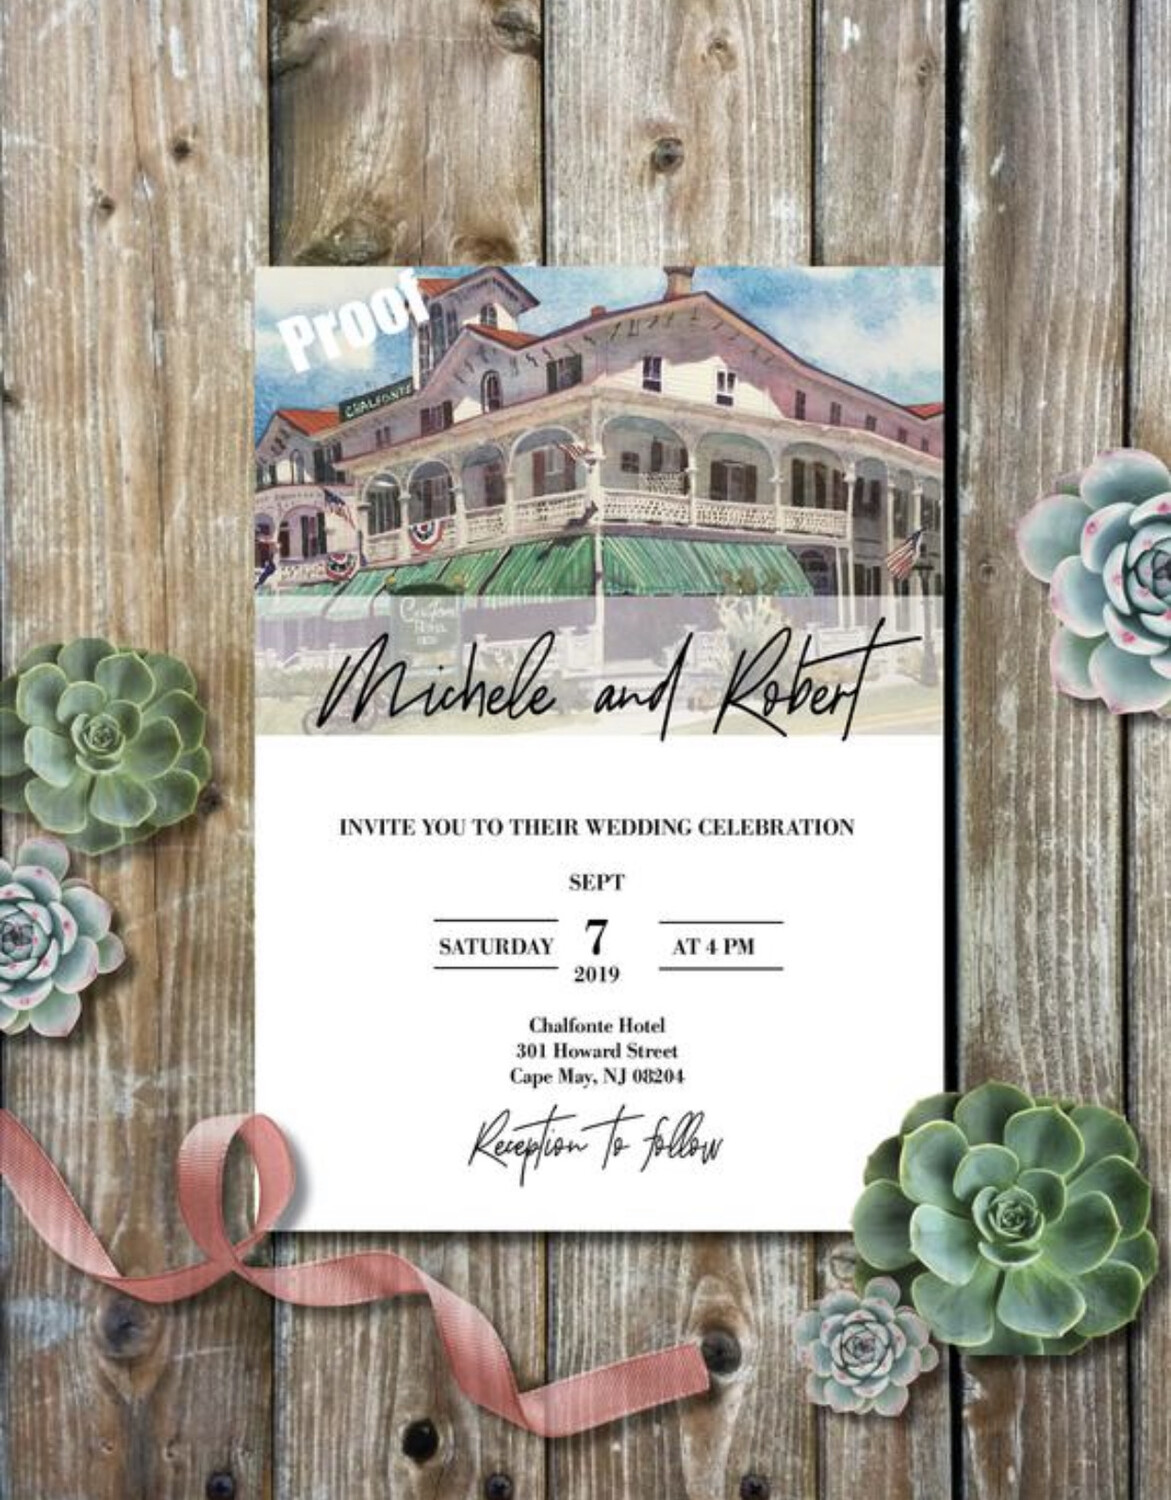 Chalfonte Hotel in Cape May, NJ - Wedding Invitations on Luxurious Paper with Envelopes - Set of 25 - Watercolor Invitation 